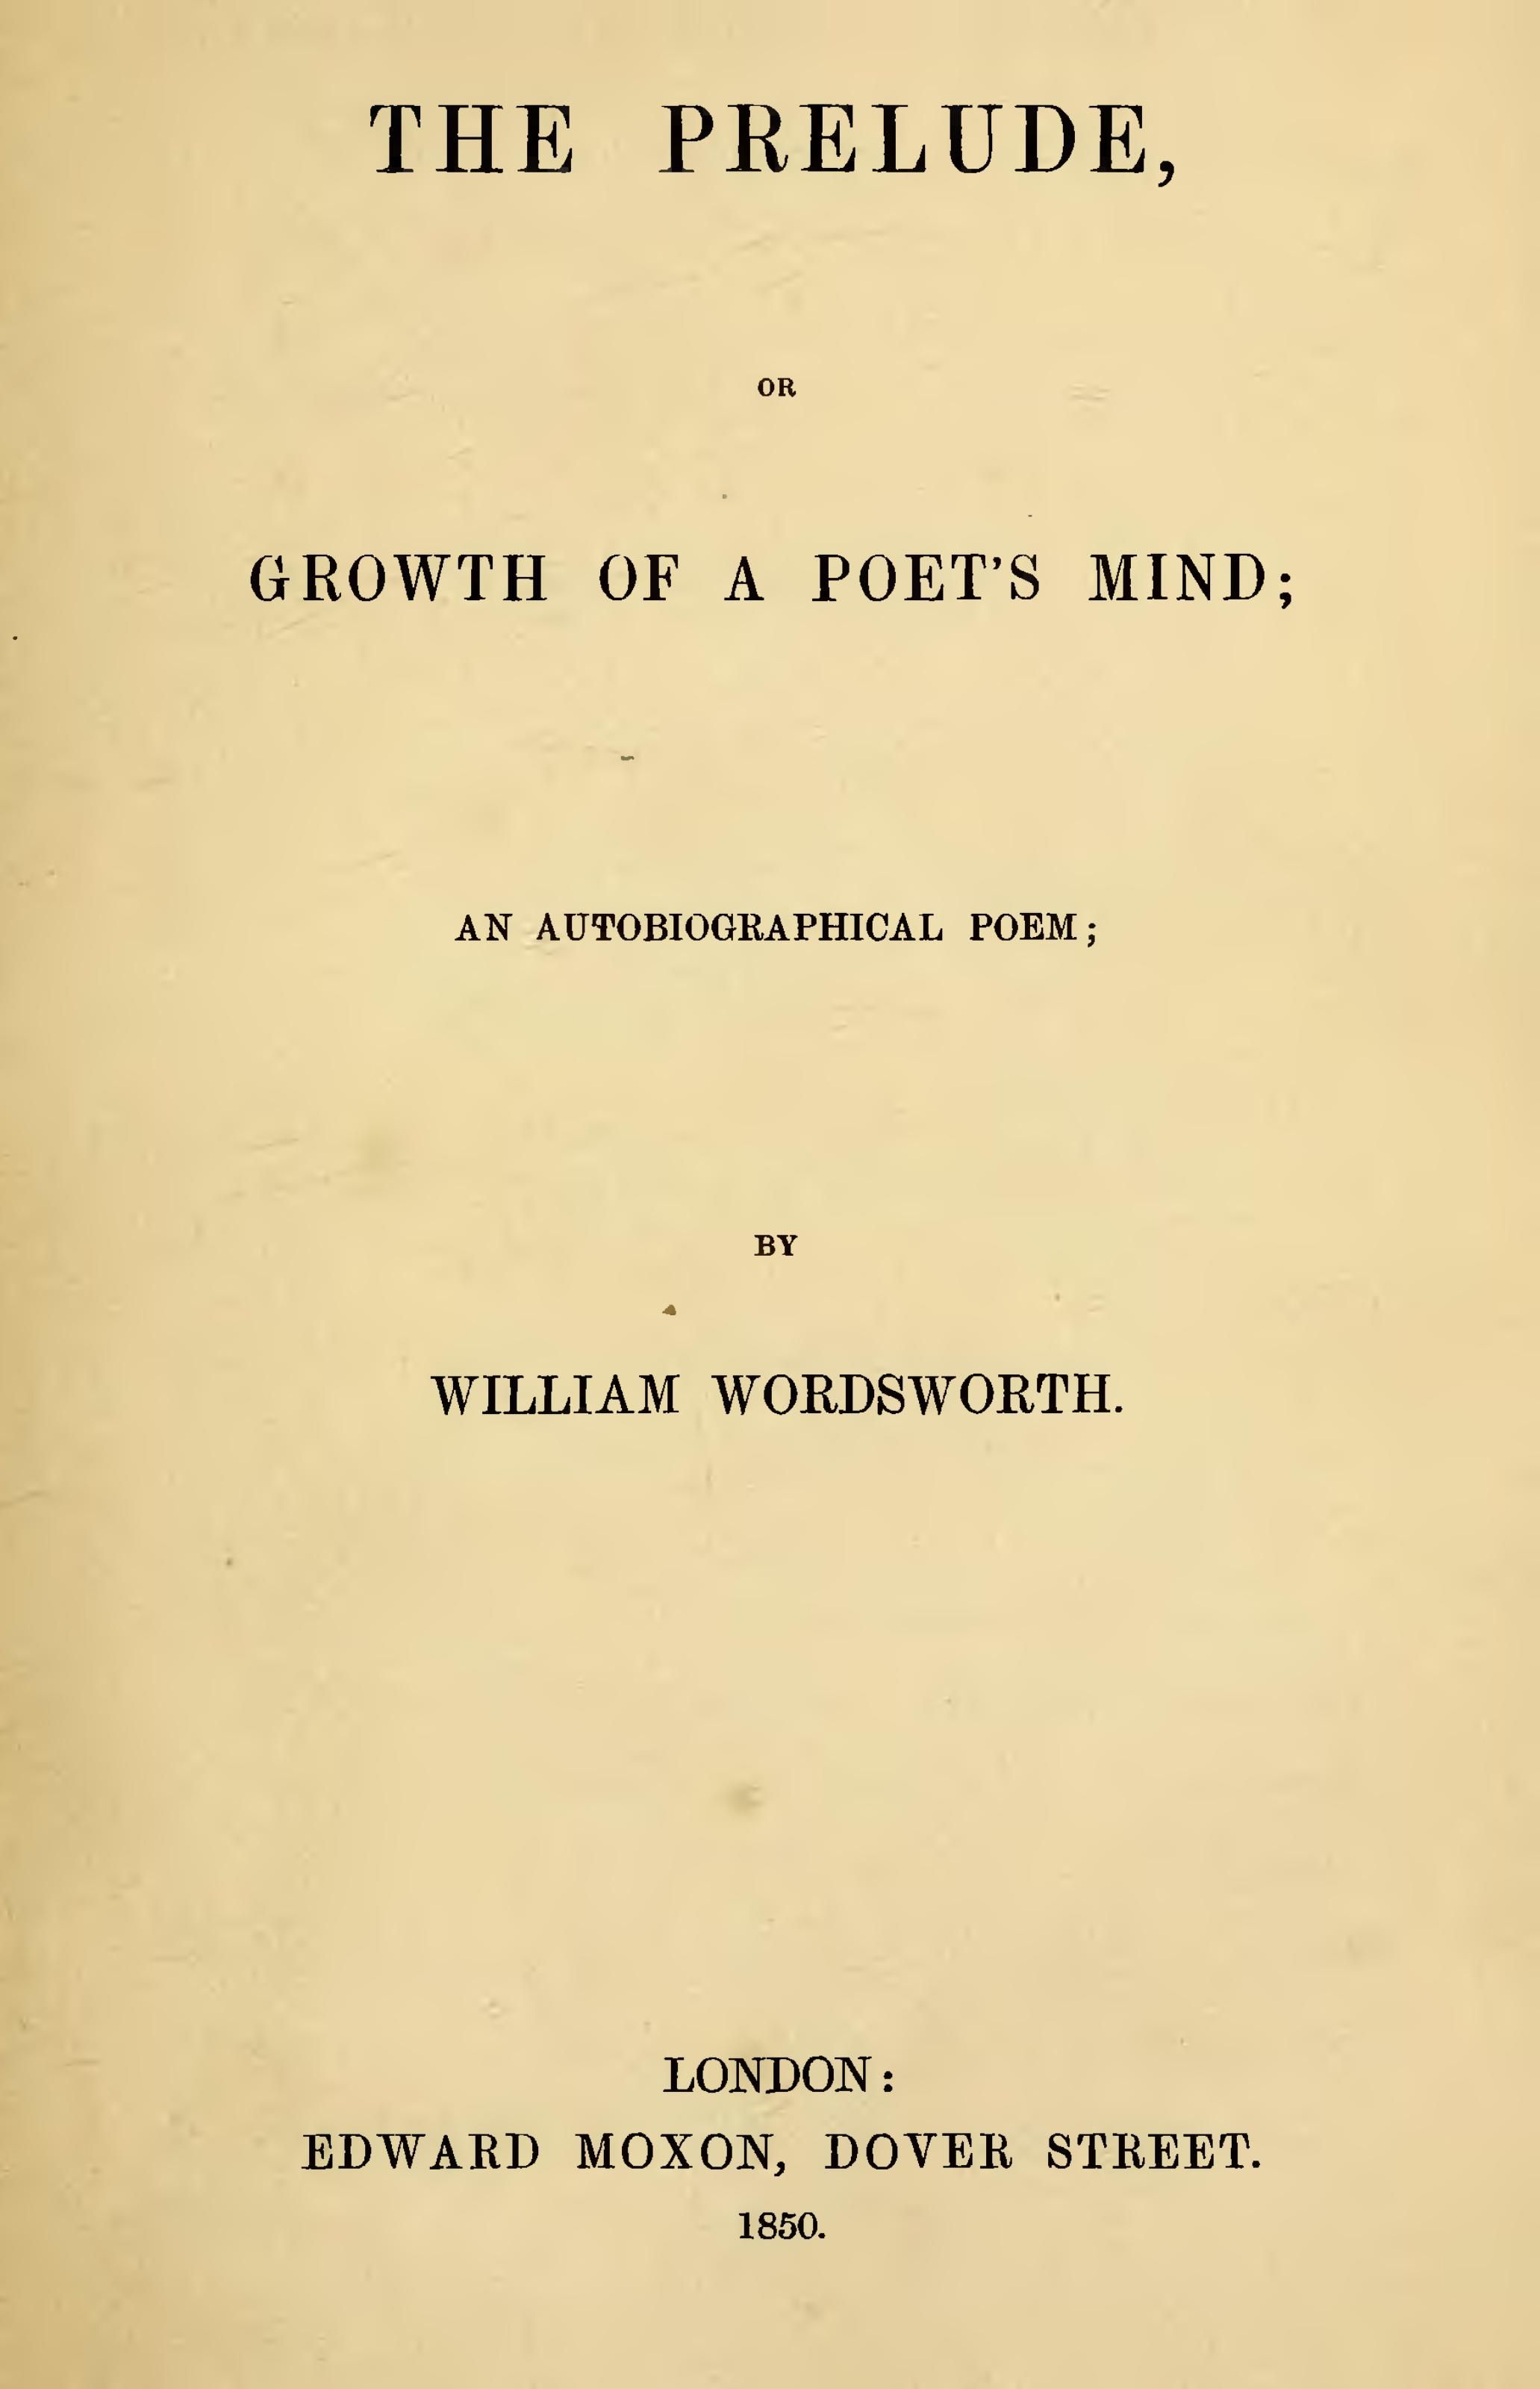 the prelude poem by william wordsworth